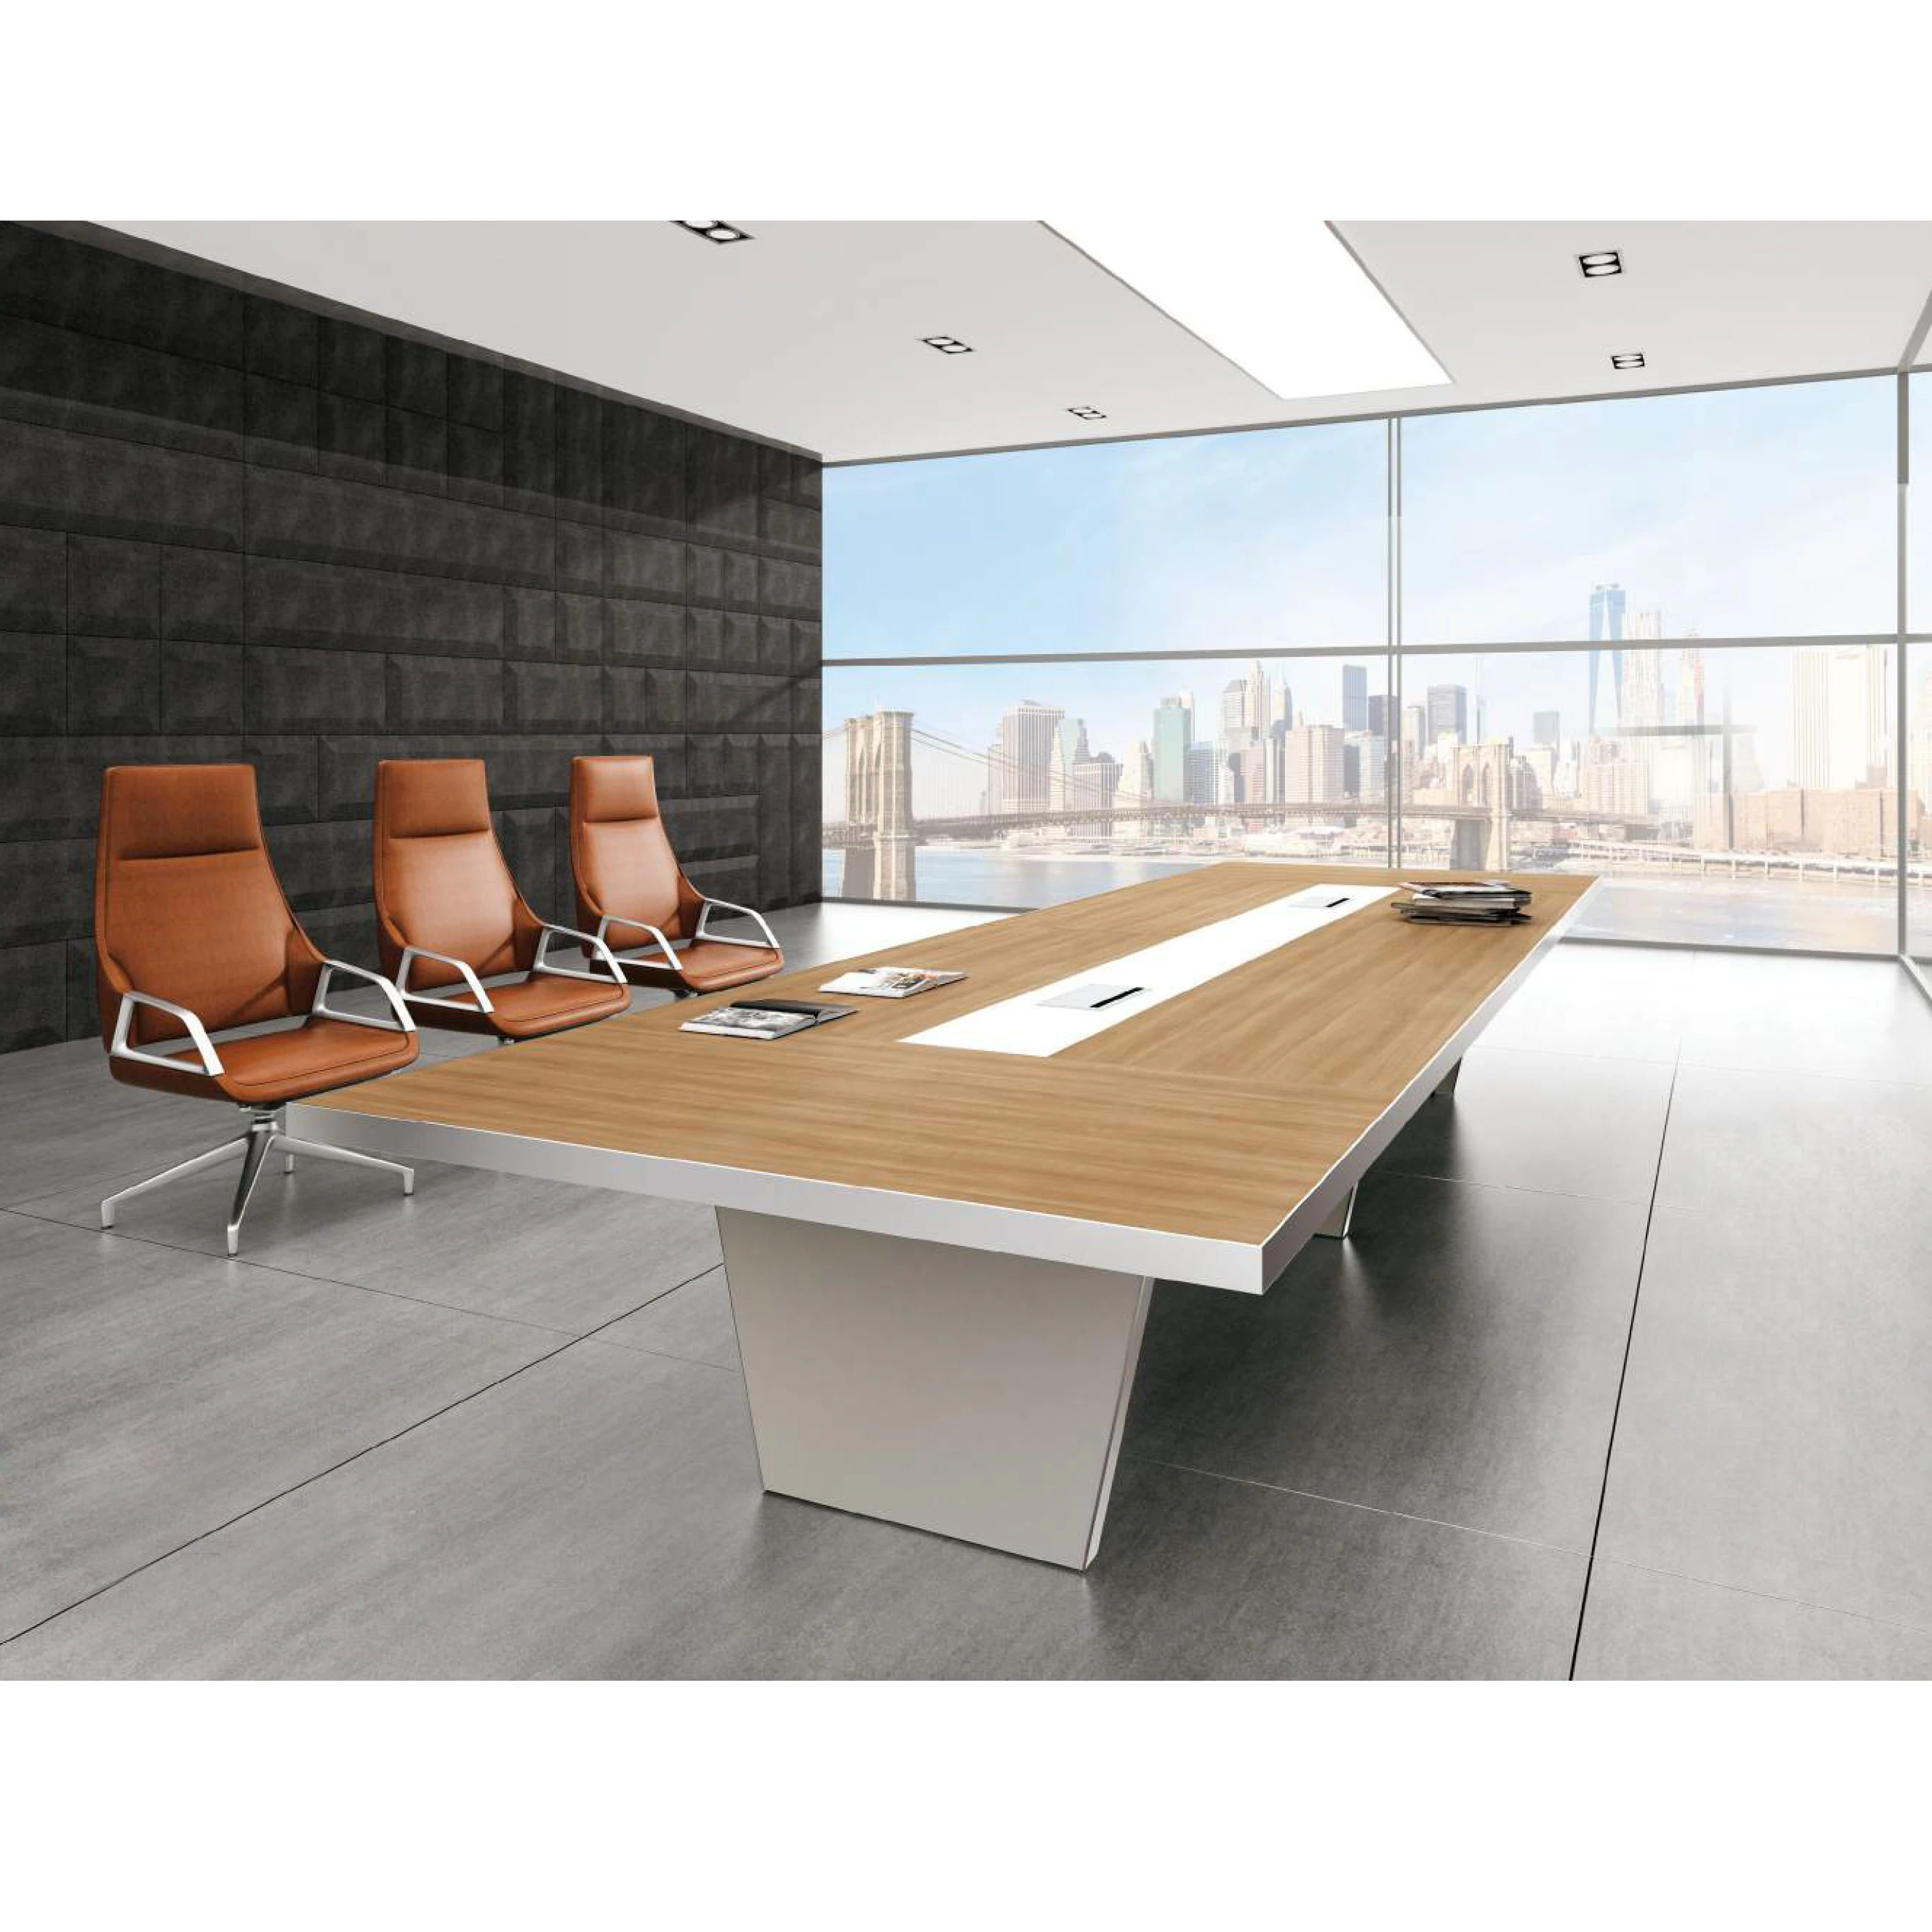 China Factory Manufacture 10 Person Seater Modern Office Conference Table Meeting Conference Room Ta